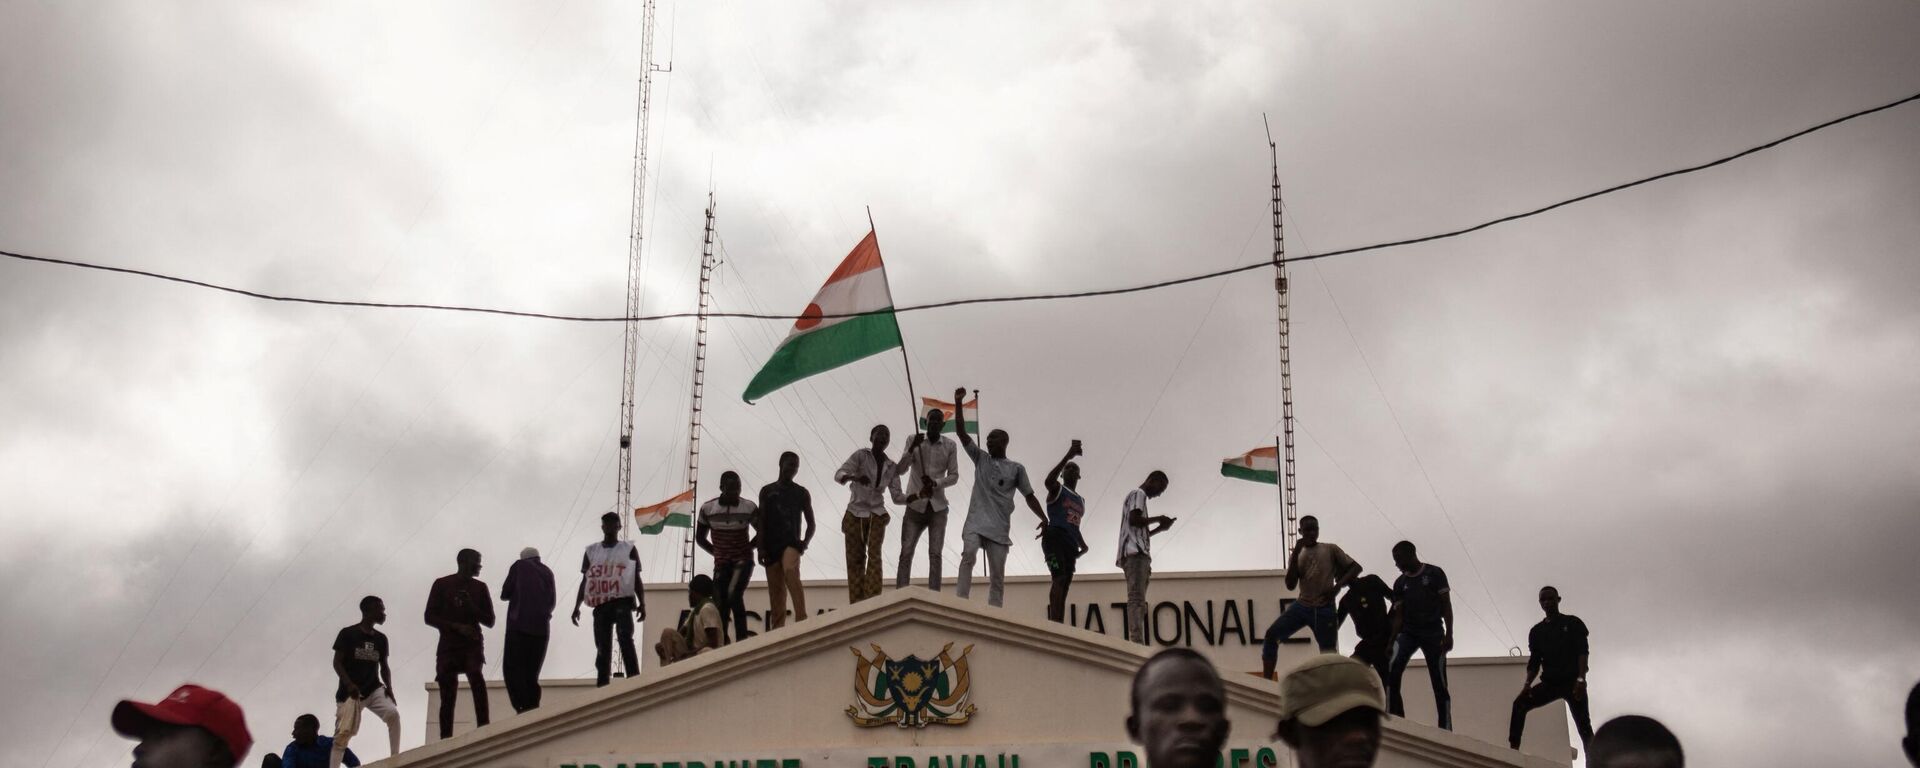 Protesters hold a Niger flag during a demonstration on independence day in Niamey on August 3, 2023. Hundreds of people backing the coup in Niger gathered on August 3, 2023 for a mass rally in the capital Niamey with some brandishing giant Russian flags. - Sputnik International, 1920, 06.08.2023